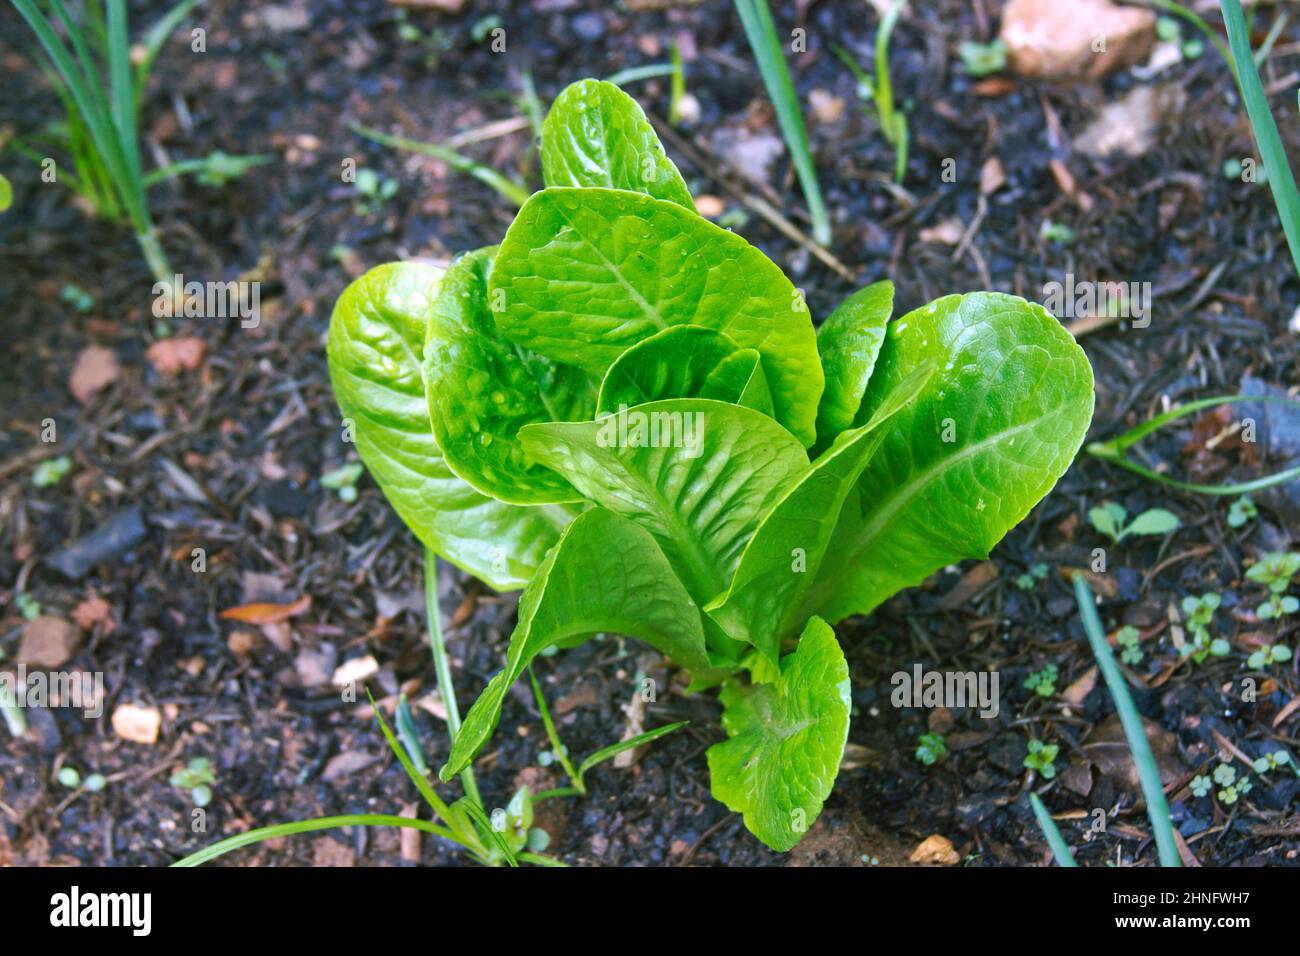 A head of Romaine lettuce growing in a vegetable garden next to onions Stock Photo